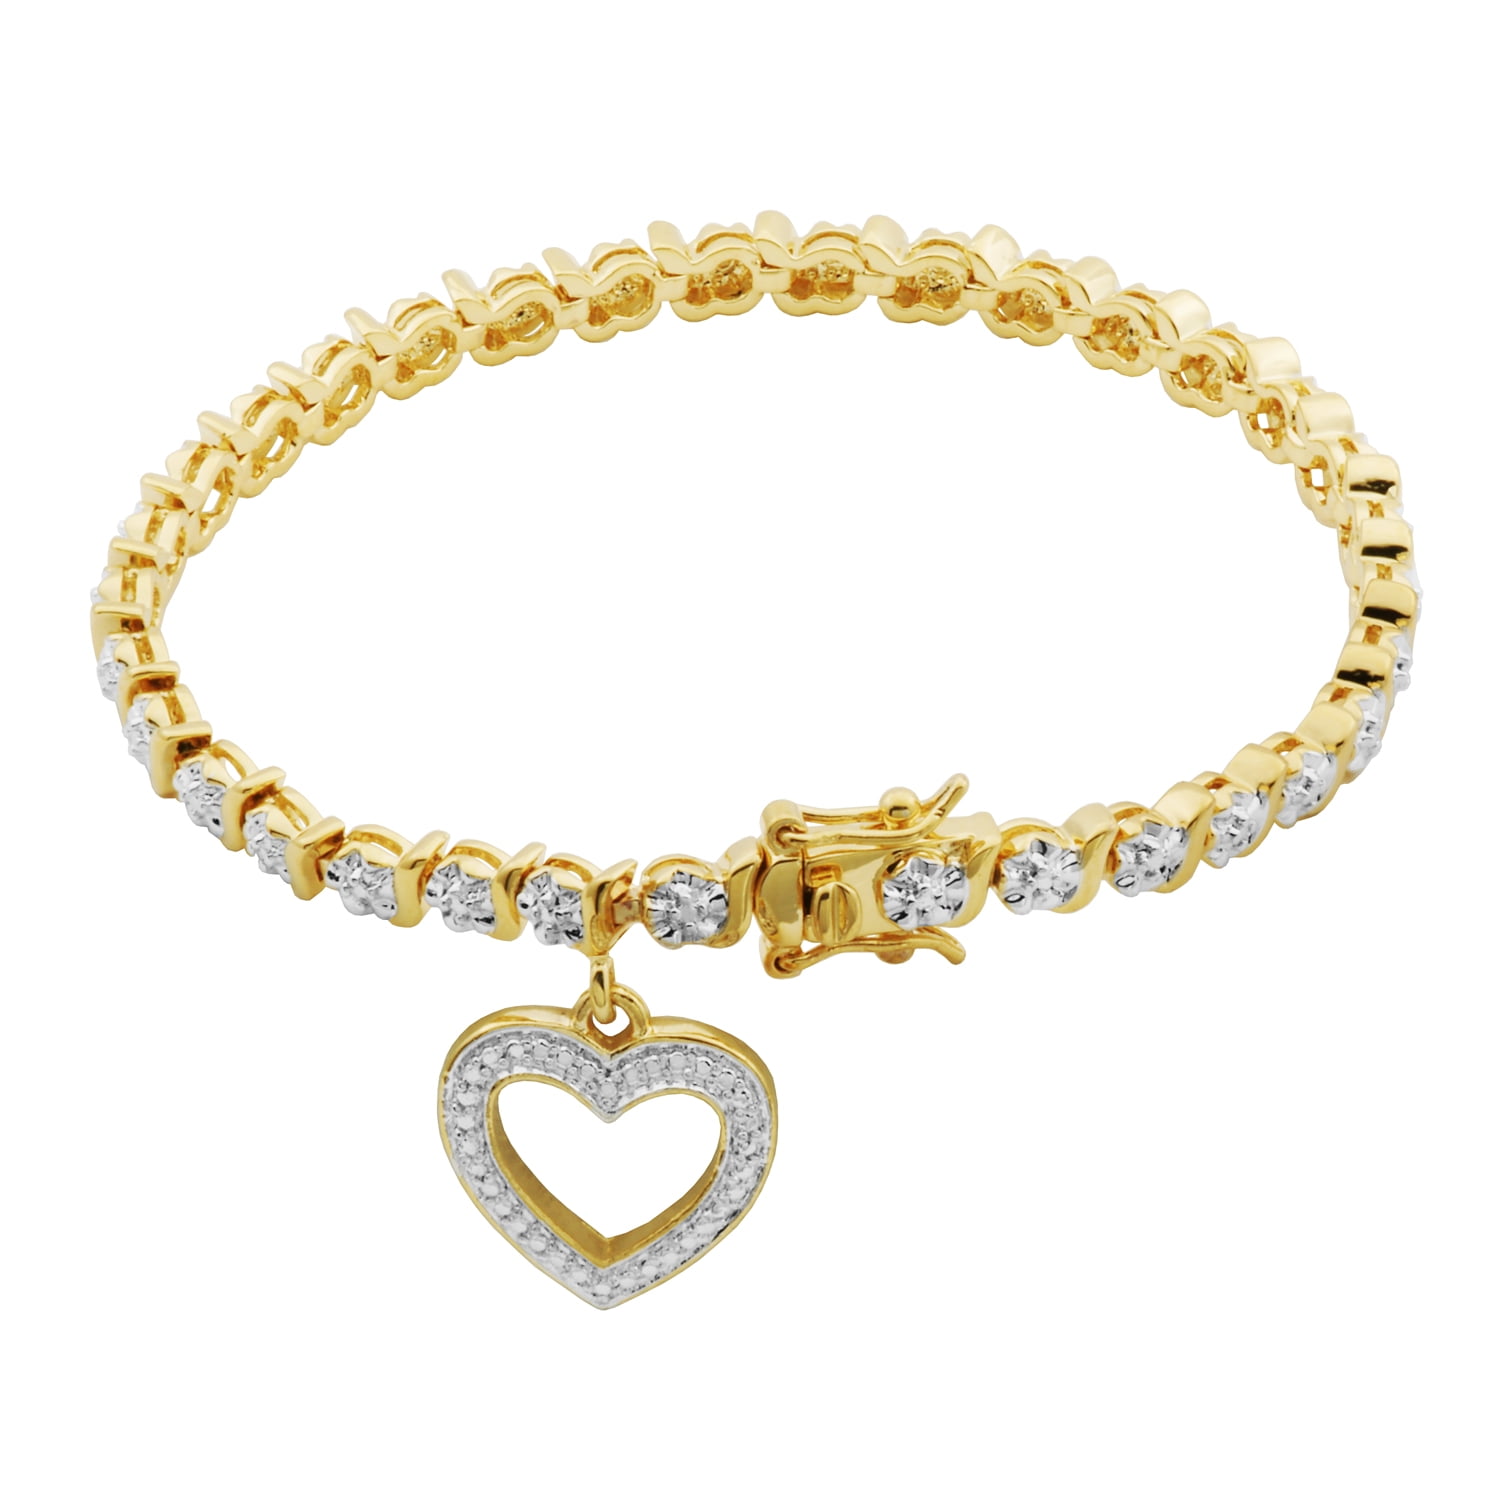 Details about   Gold Finish Open Hearts Girl's Dangling Bracelet 